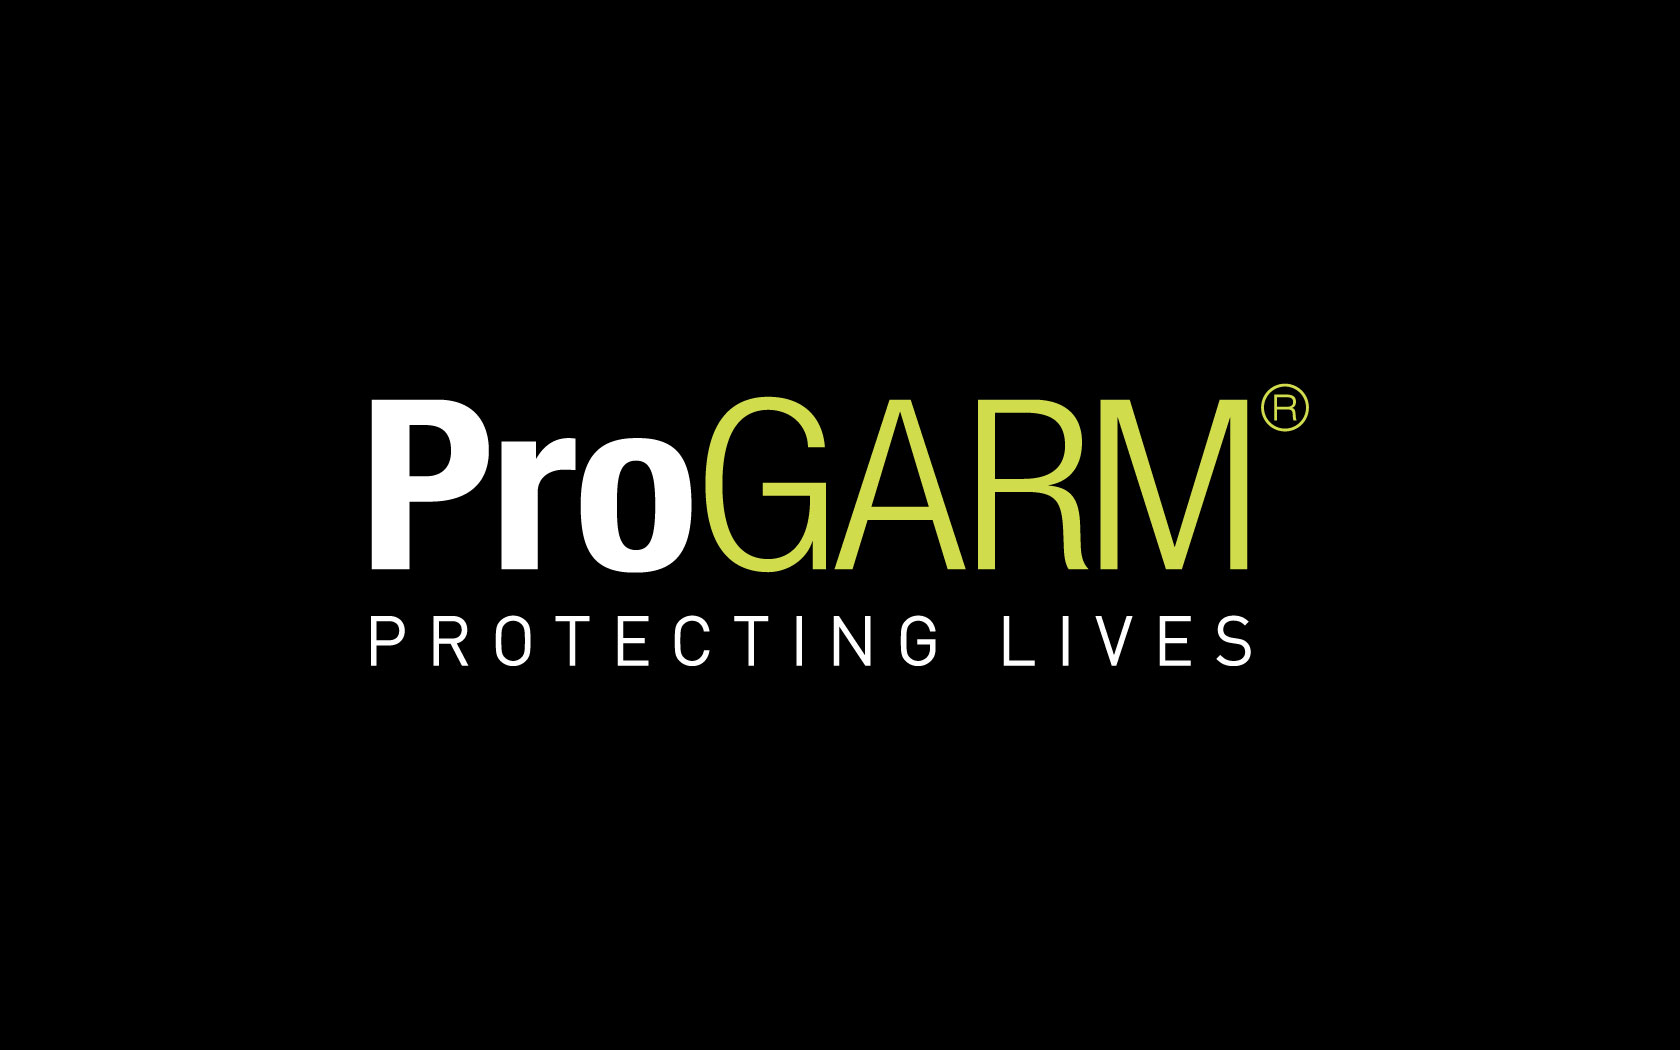 New brand, same reliability and innovation from ProGARM